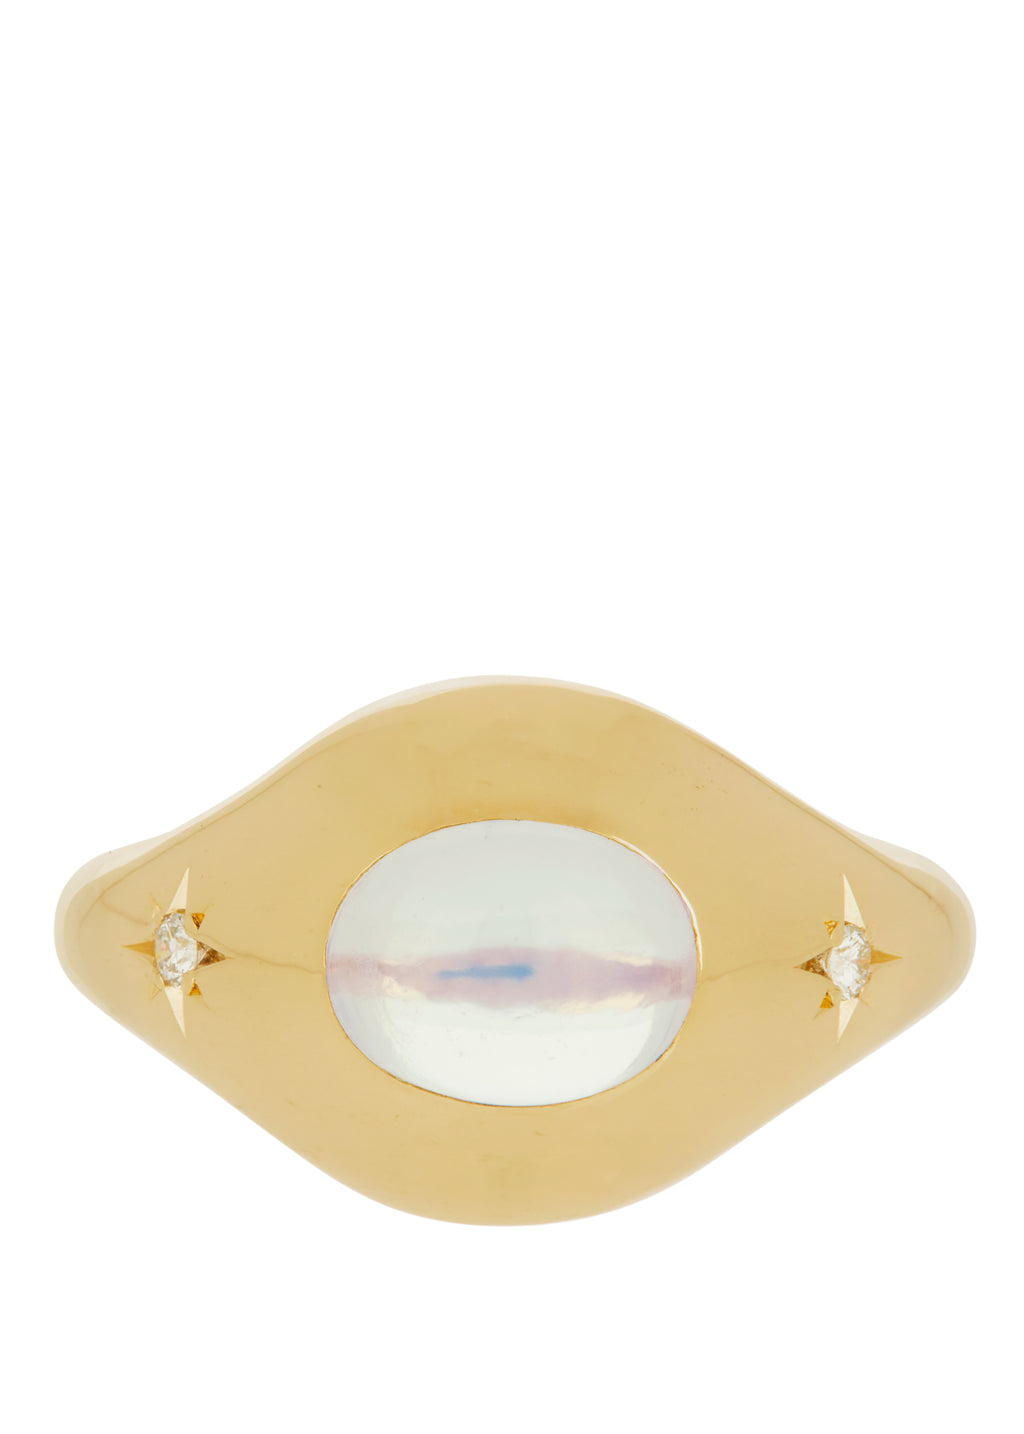 Palatial Ring with Diamonds in 14k